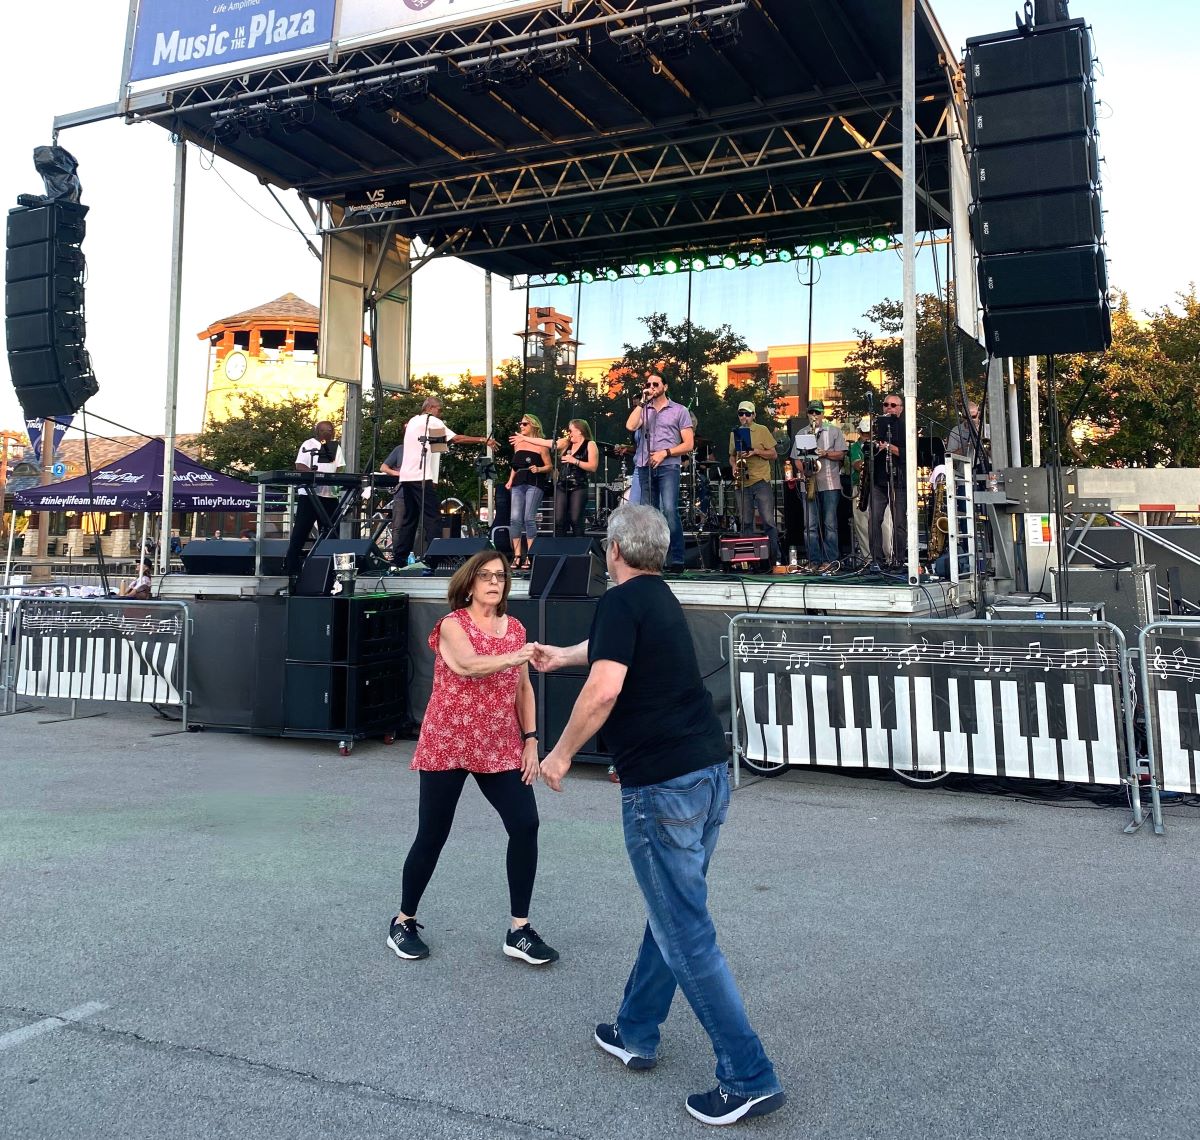 A couple dancing during a Music in the Plaza concert